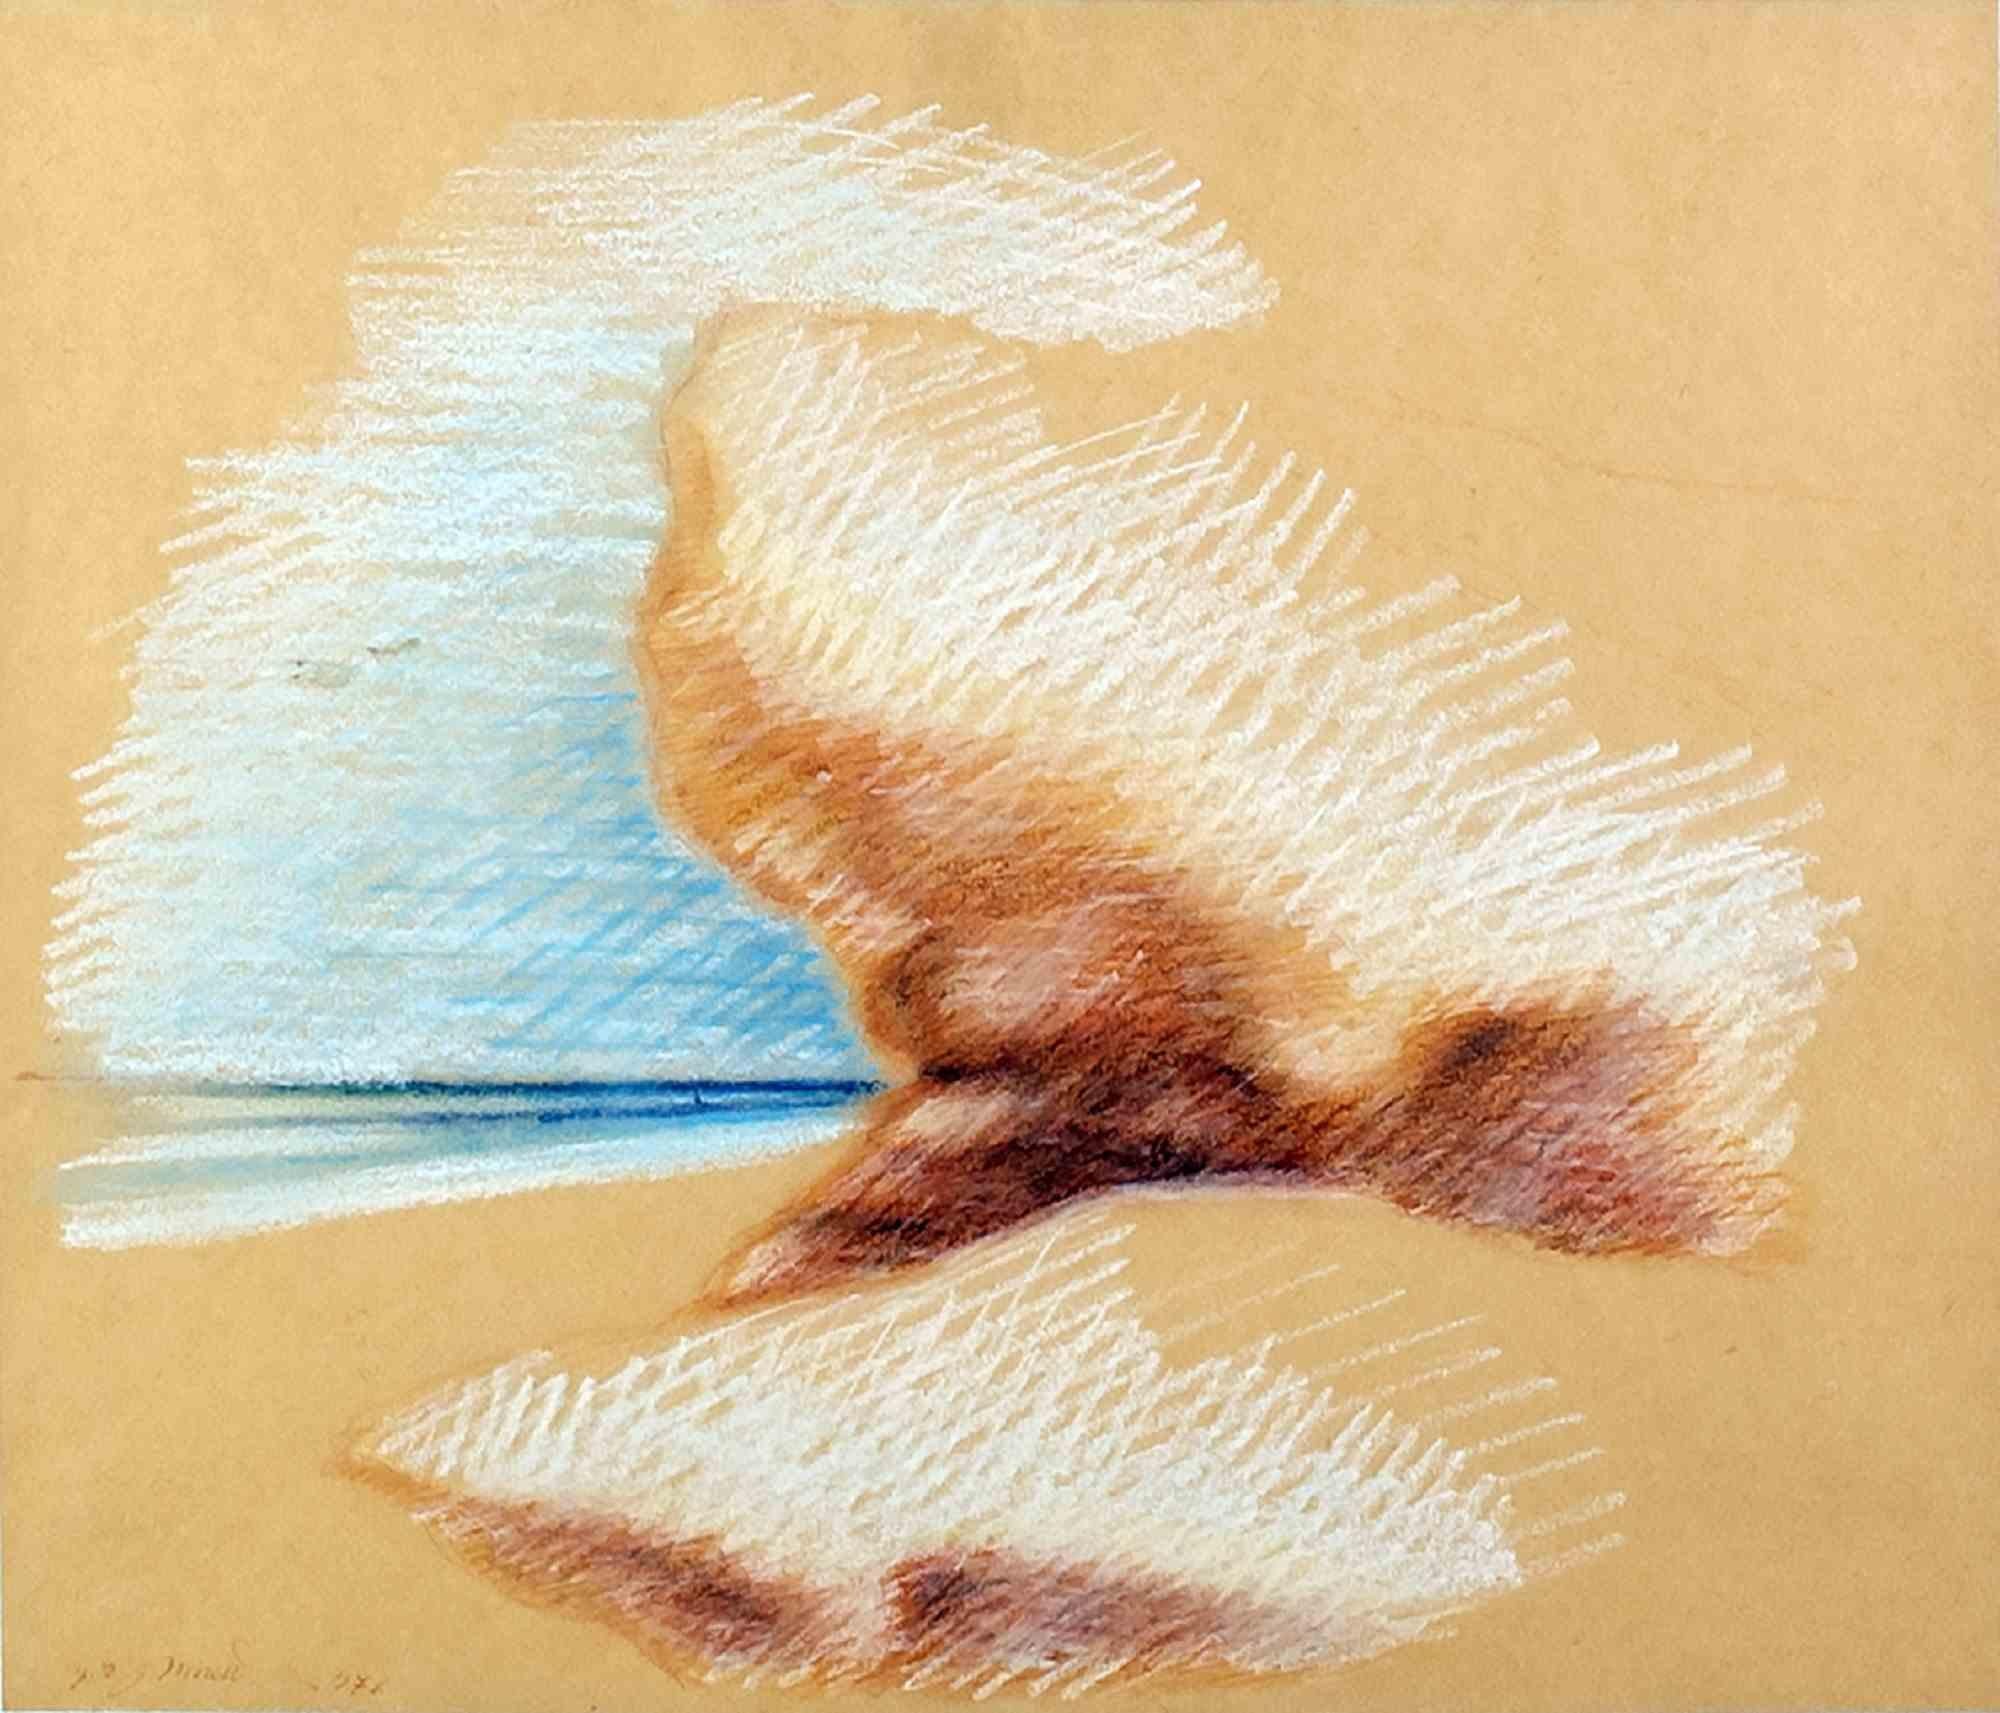 A loevely design by MARIO MORETTI entitled Dunes from 1976
Pastel on paper
Signed and dated lower left: Moretti 1976